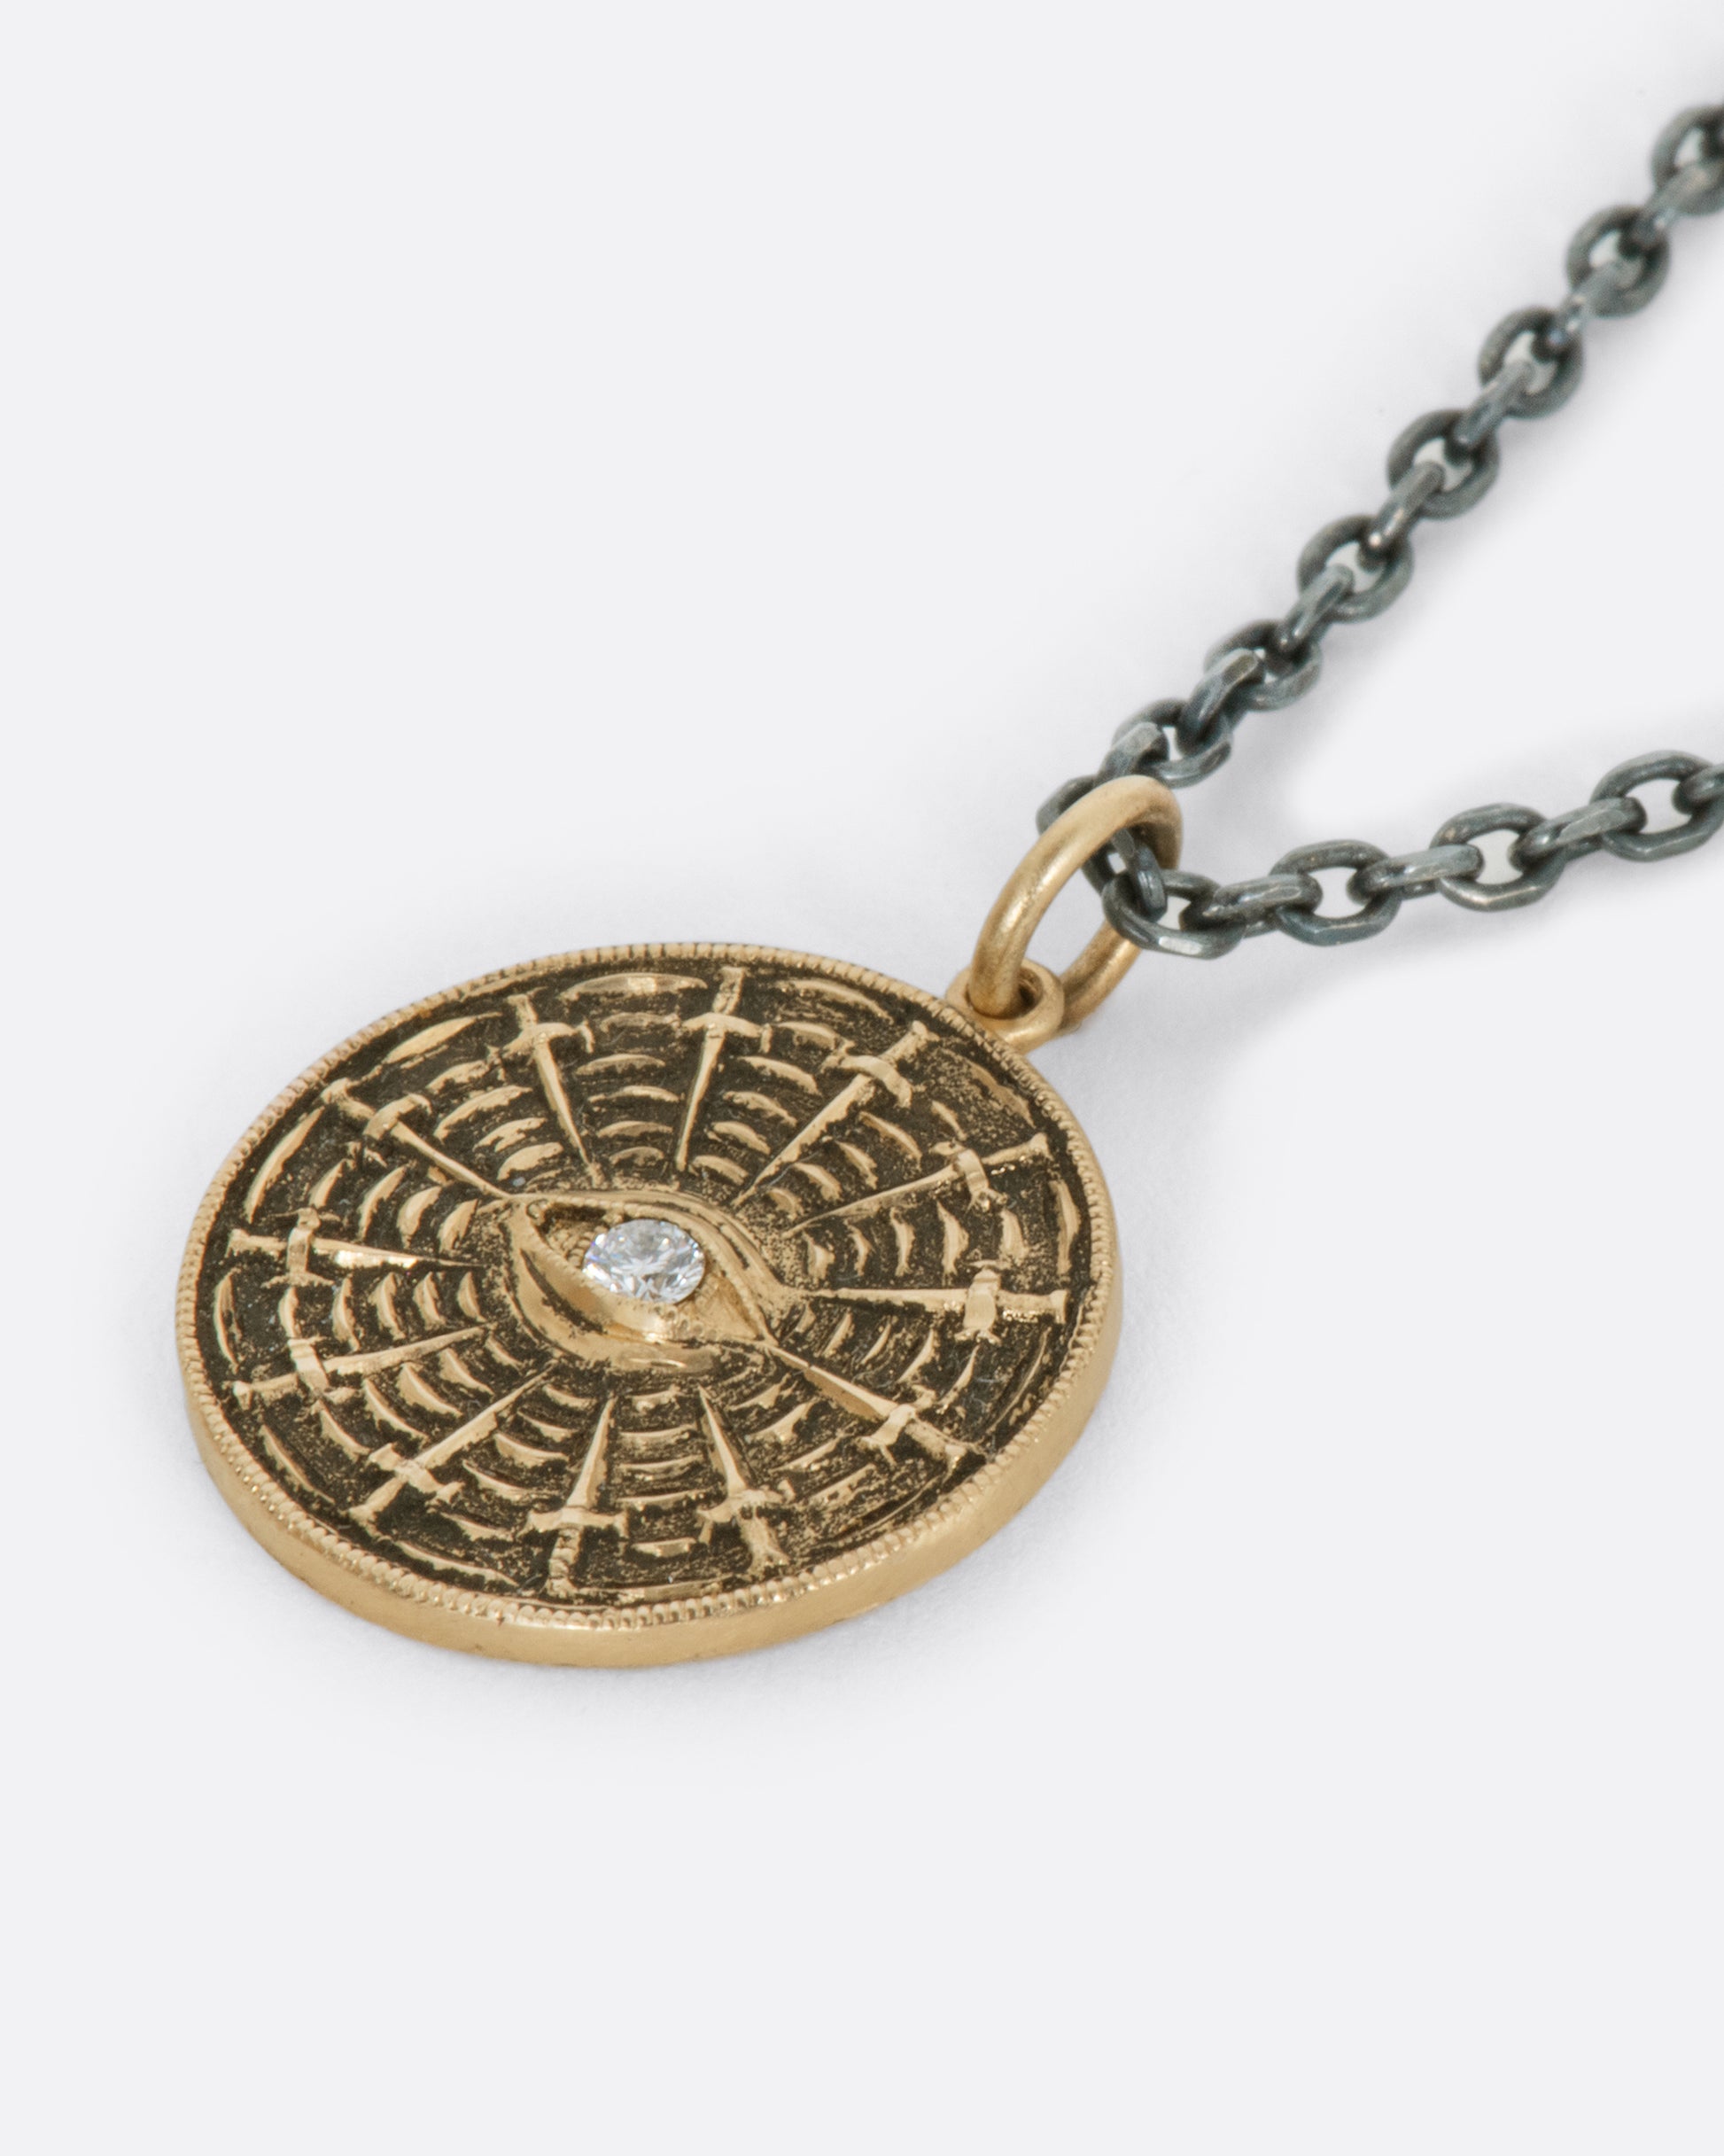 An oxidized sterling silver necklace with a yellow disc pendant, with a diamond eye at its center and swords radiating around it.